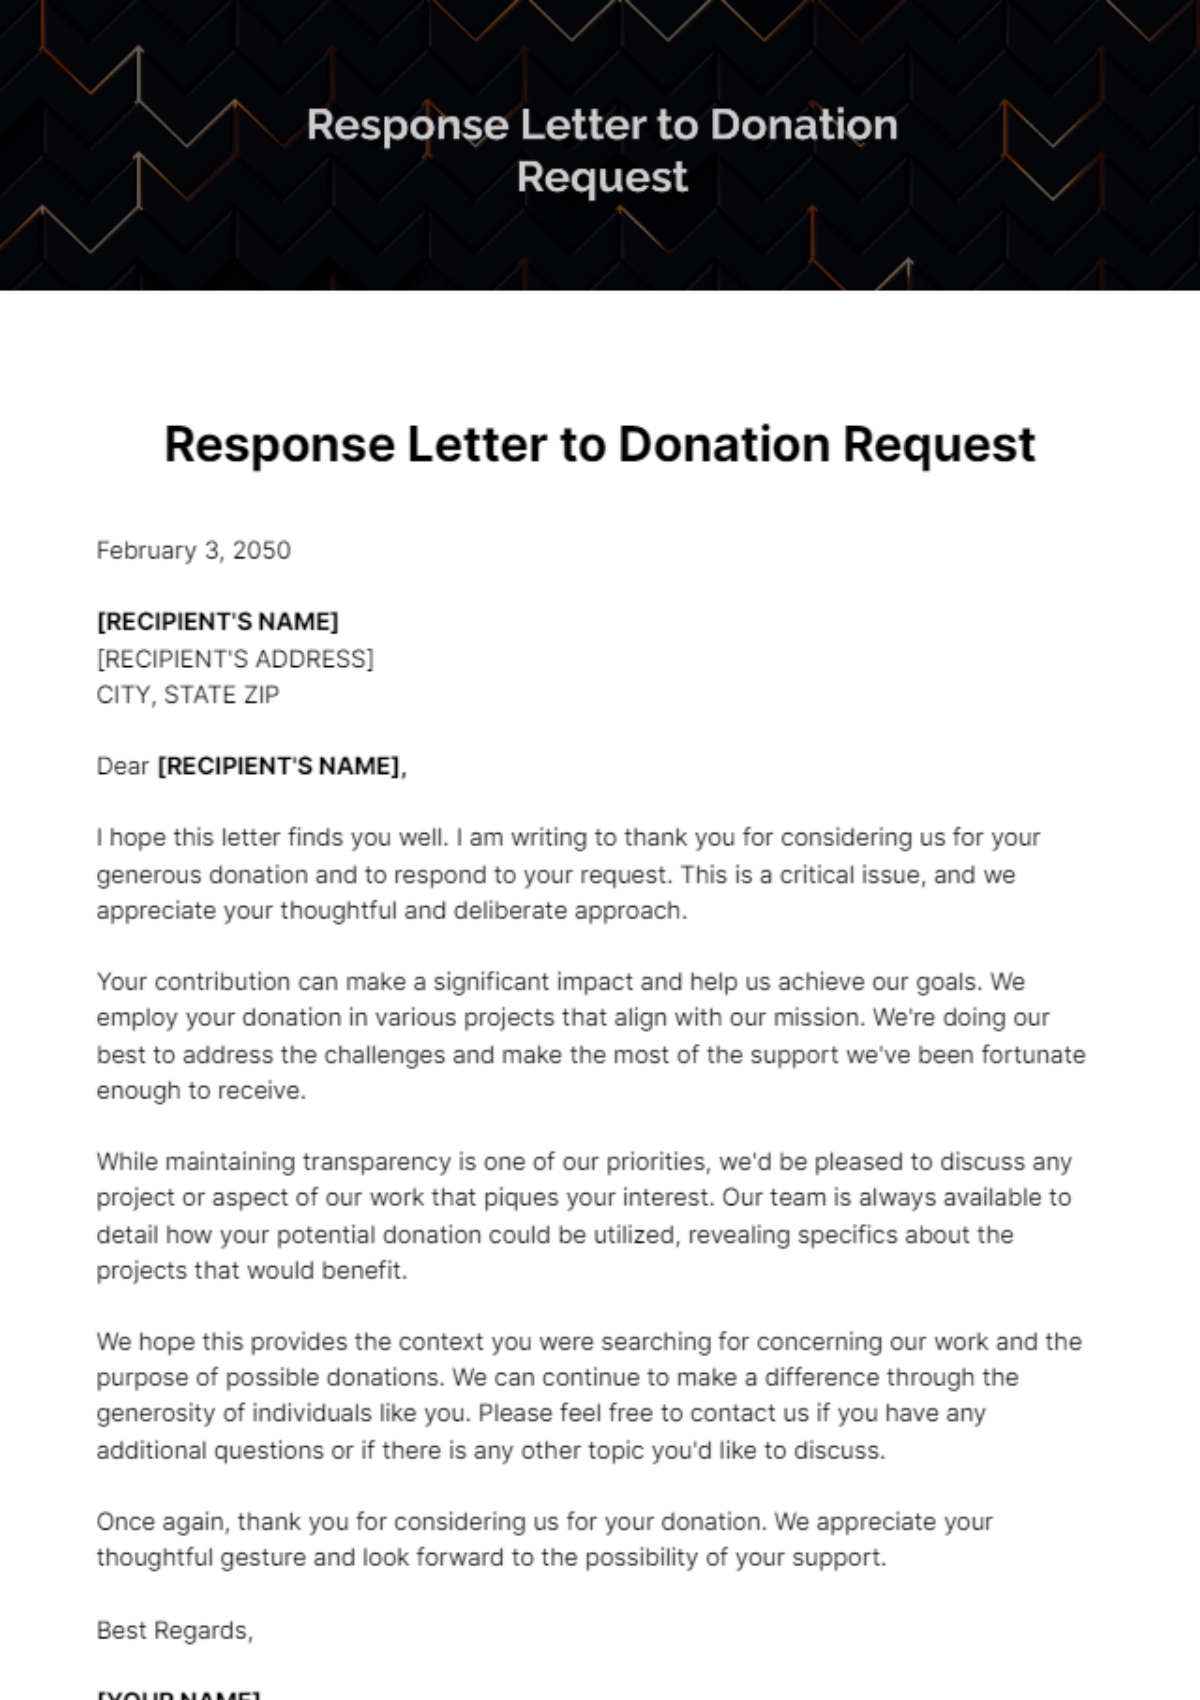 Free Response Letter to Donation Request Template